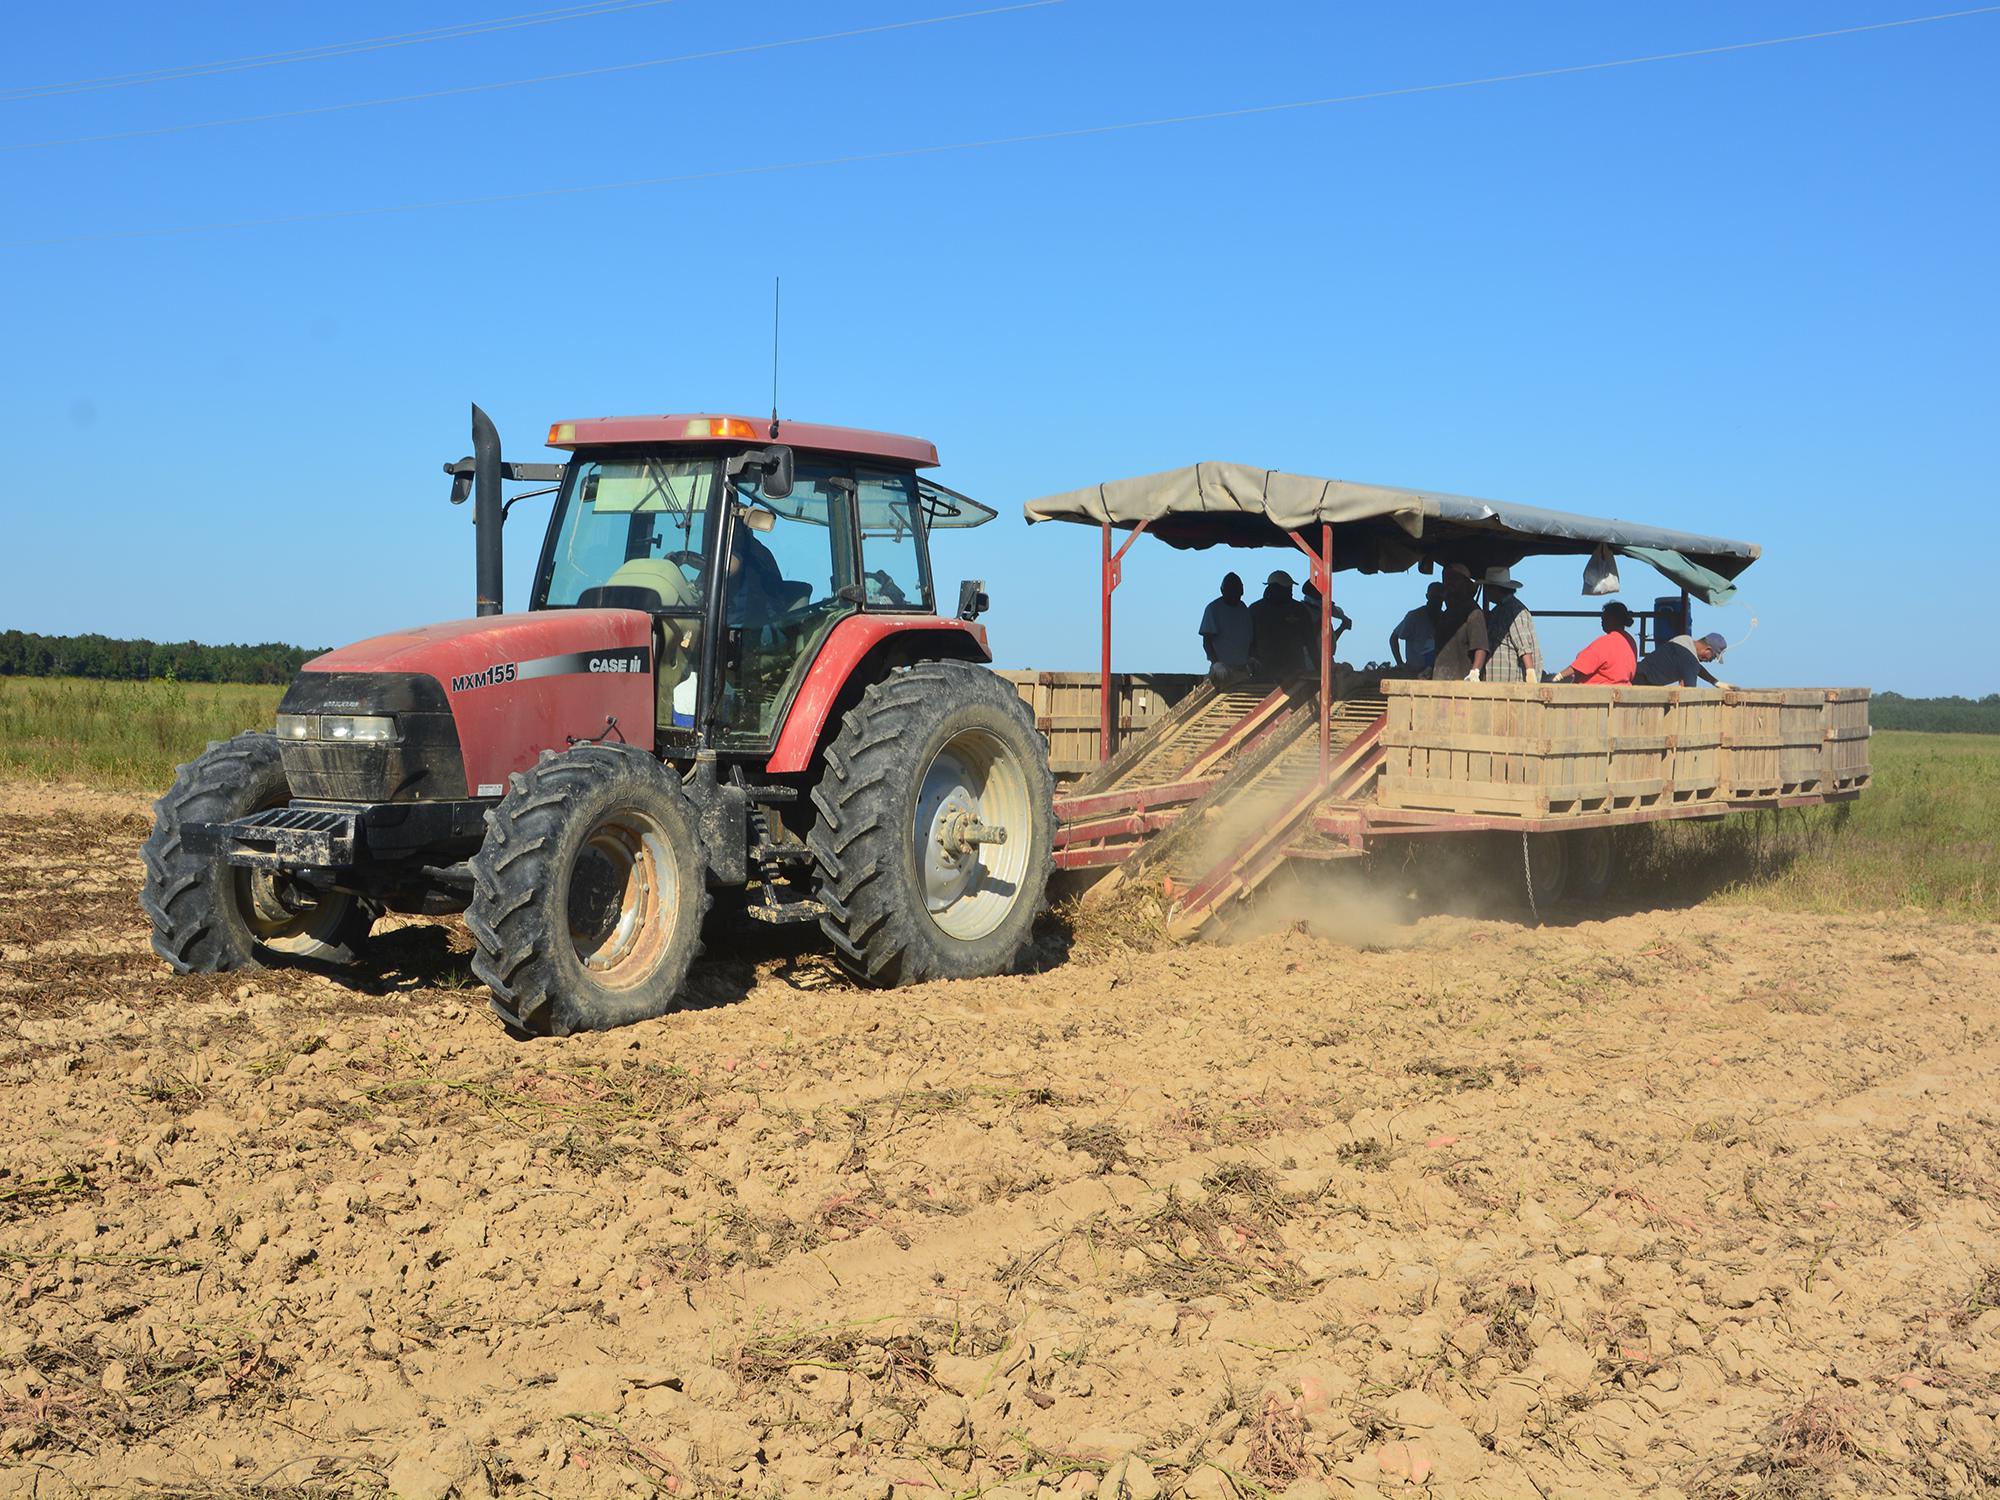 This tractor creeps across a Vardaman, Mississippi, field Sept. 20, 2016, digging sweet potatoes while workers sort them based on size and quality. (Photo by MSU Extension Service/Linda Breazeale)